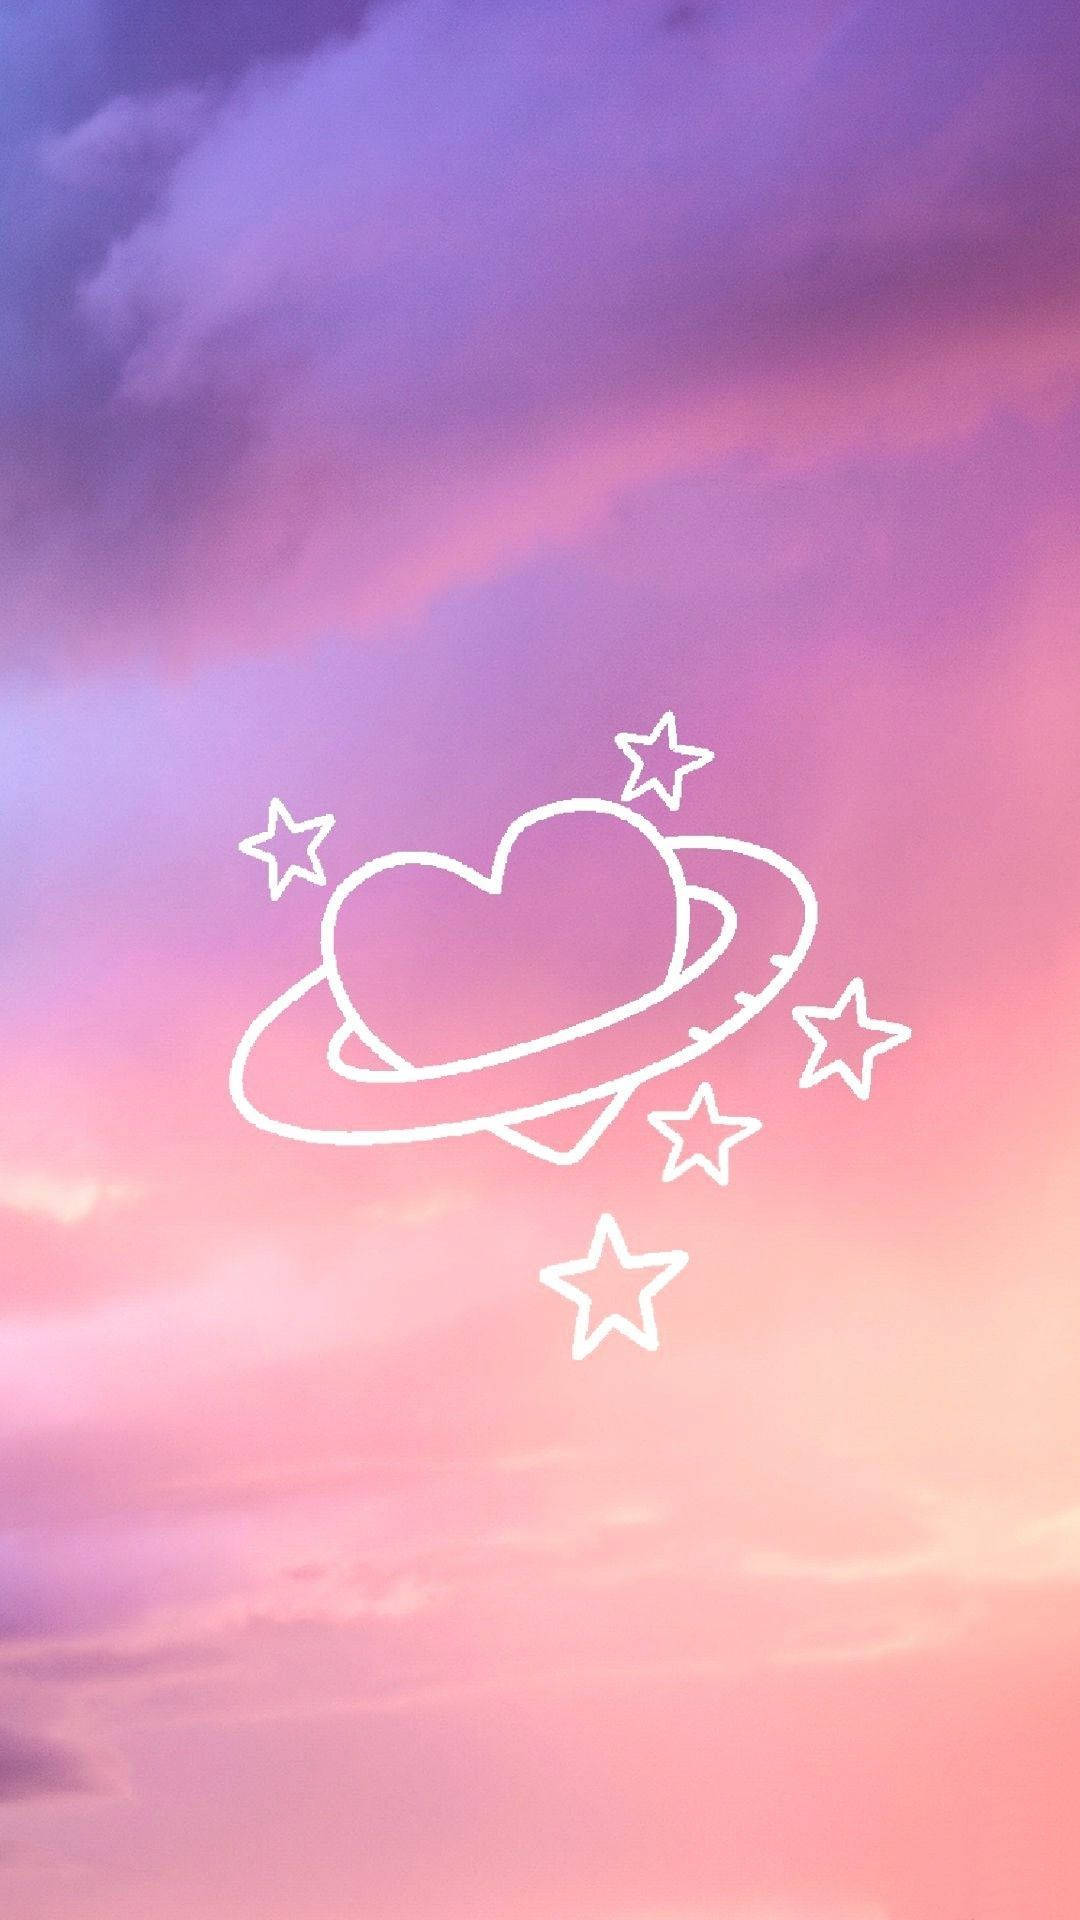 A heart shaped planet and stars in the sky - Stars, profile picture